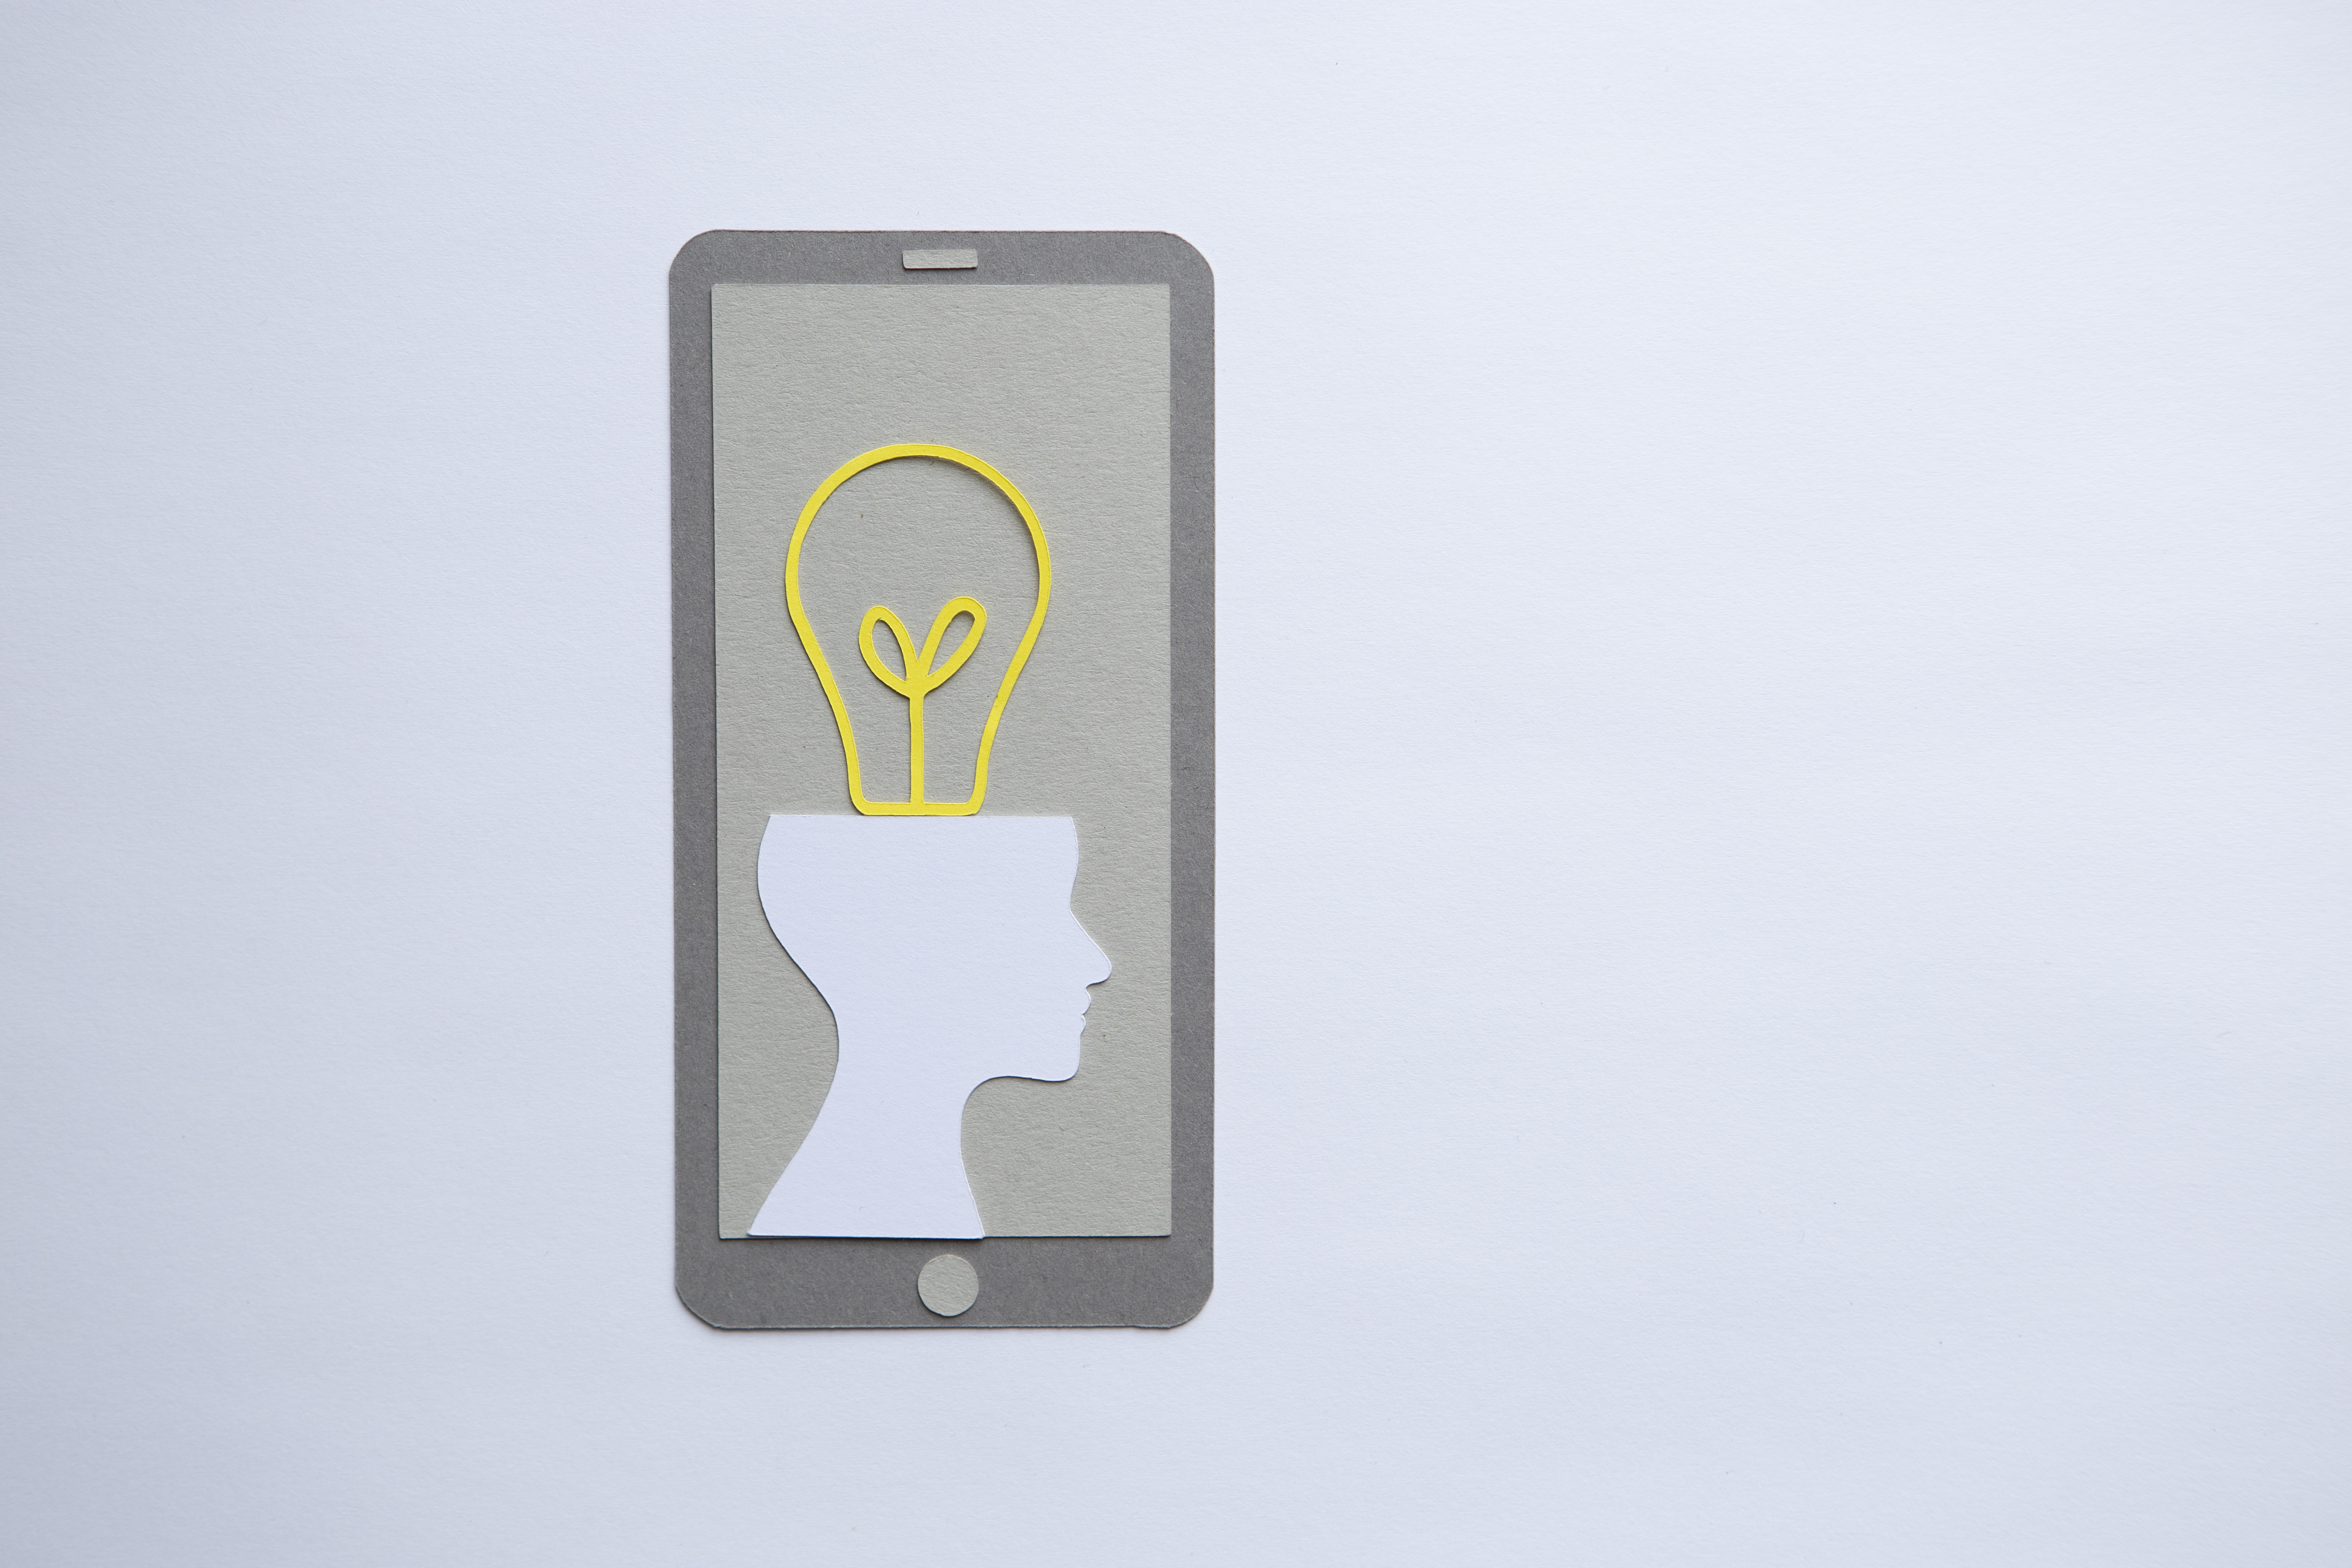 Paper cut-out of a phone, featuring a silhouette of a human head attached to a yellow lightbulb.